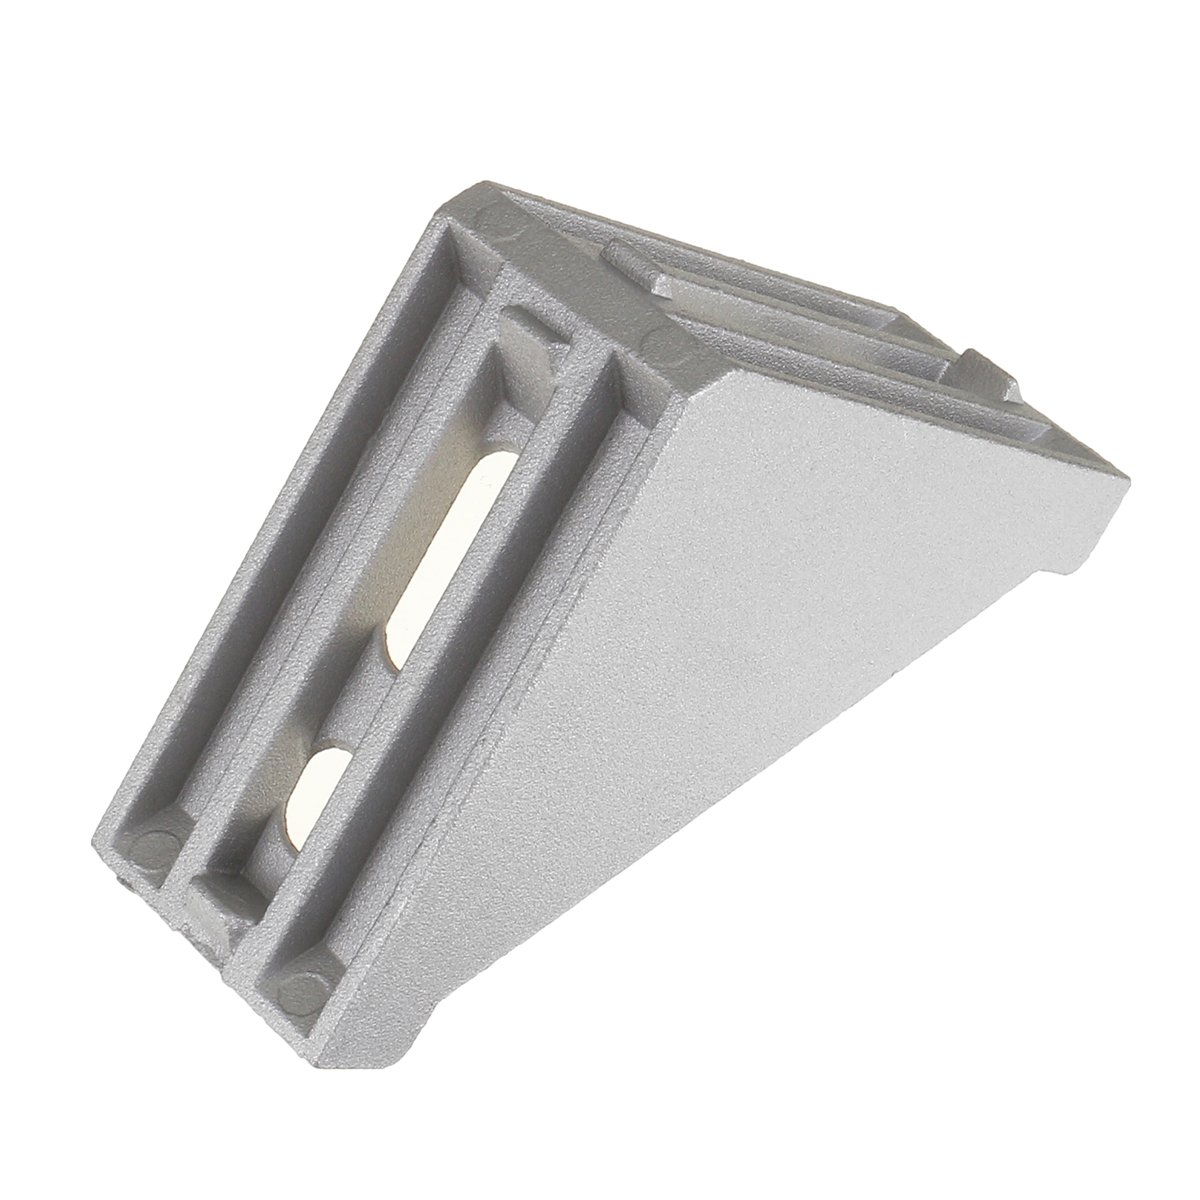 Sulevetrade-AJ40-40times80mm-Aluminum-Angle-Corner-Joint-Connector-90-degrees-4080-Series-Aluminum-P-1293672-7